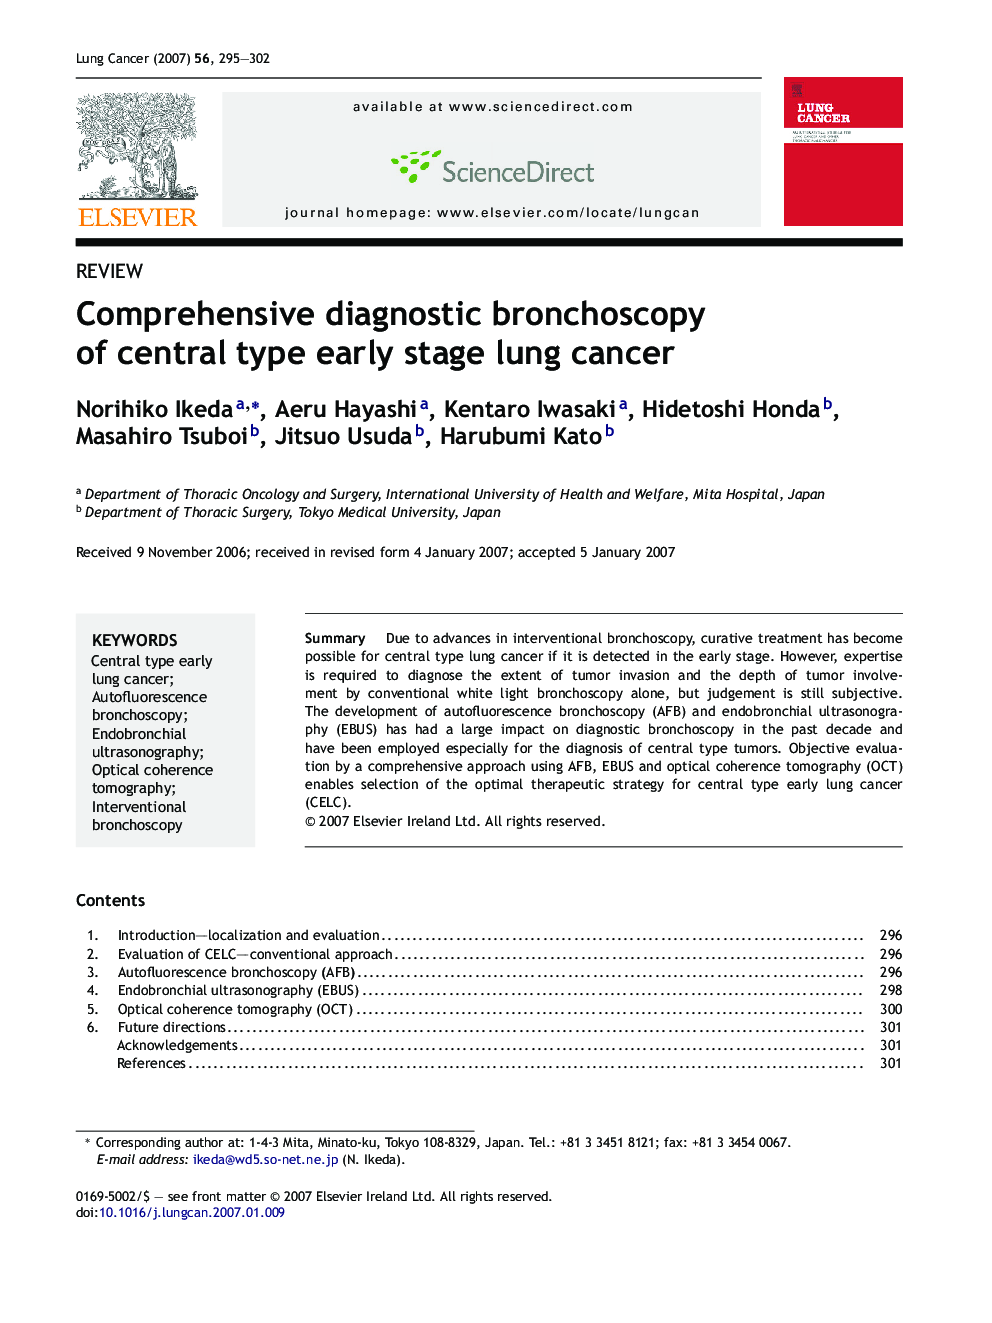 Comprehensive diagnostic bronchoscopy of central type early stage lung cancer